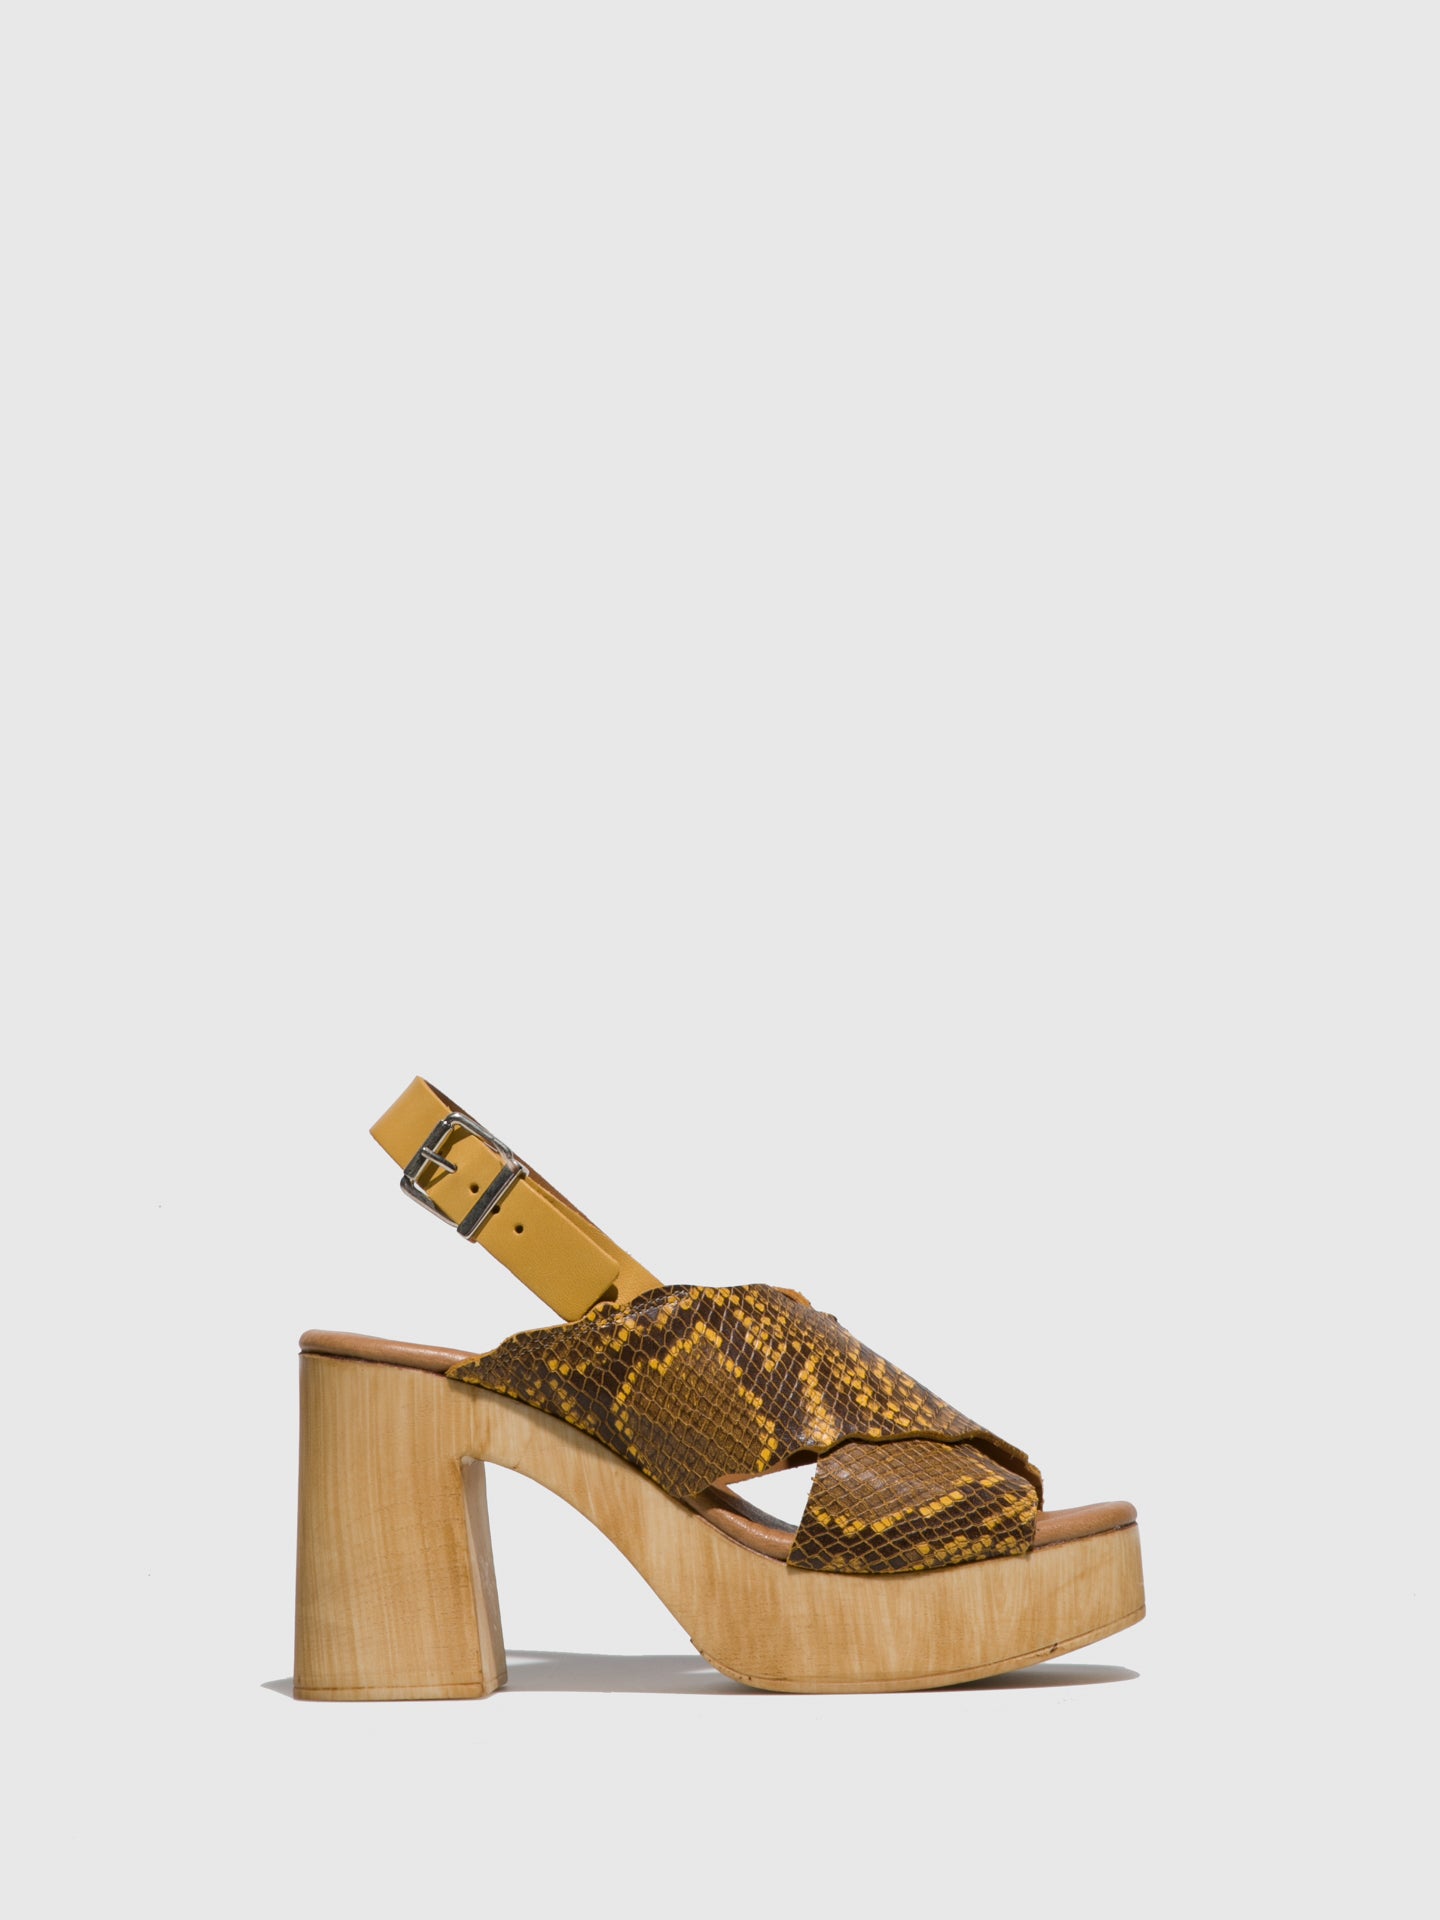 Clay's Yellow Sling-Back Pumps Sandals